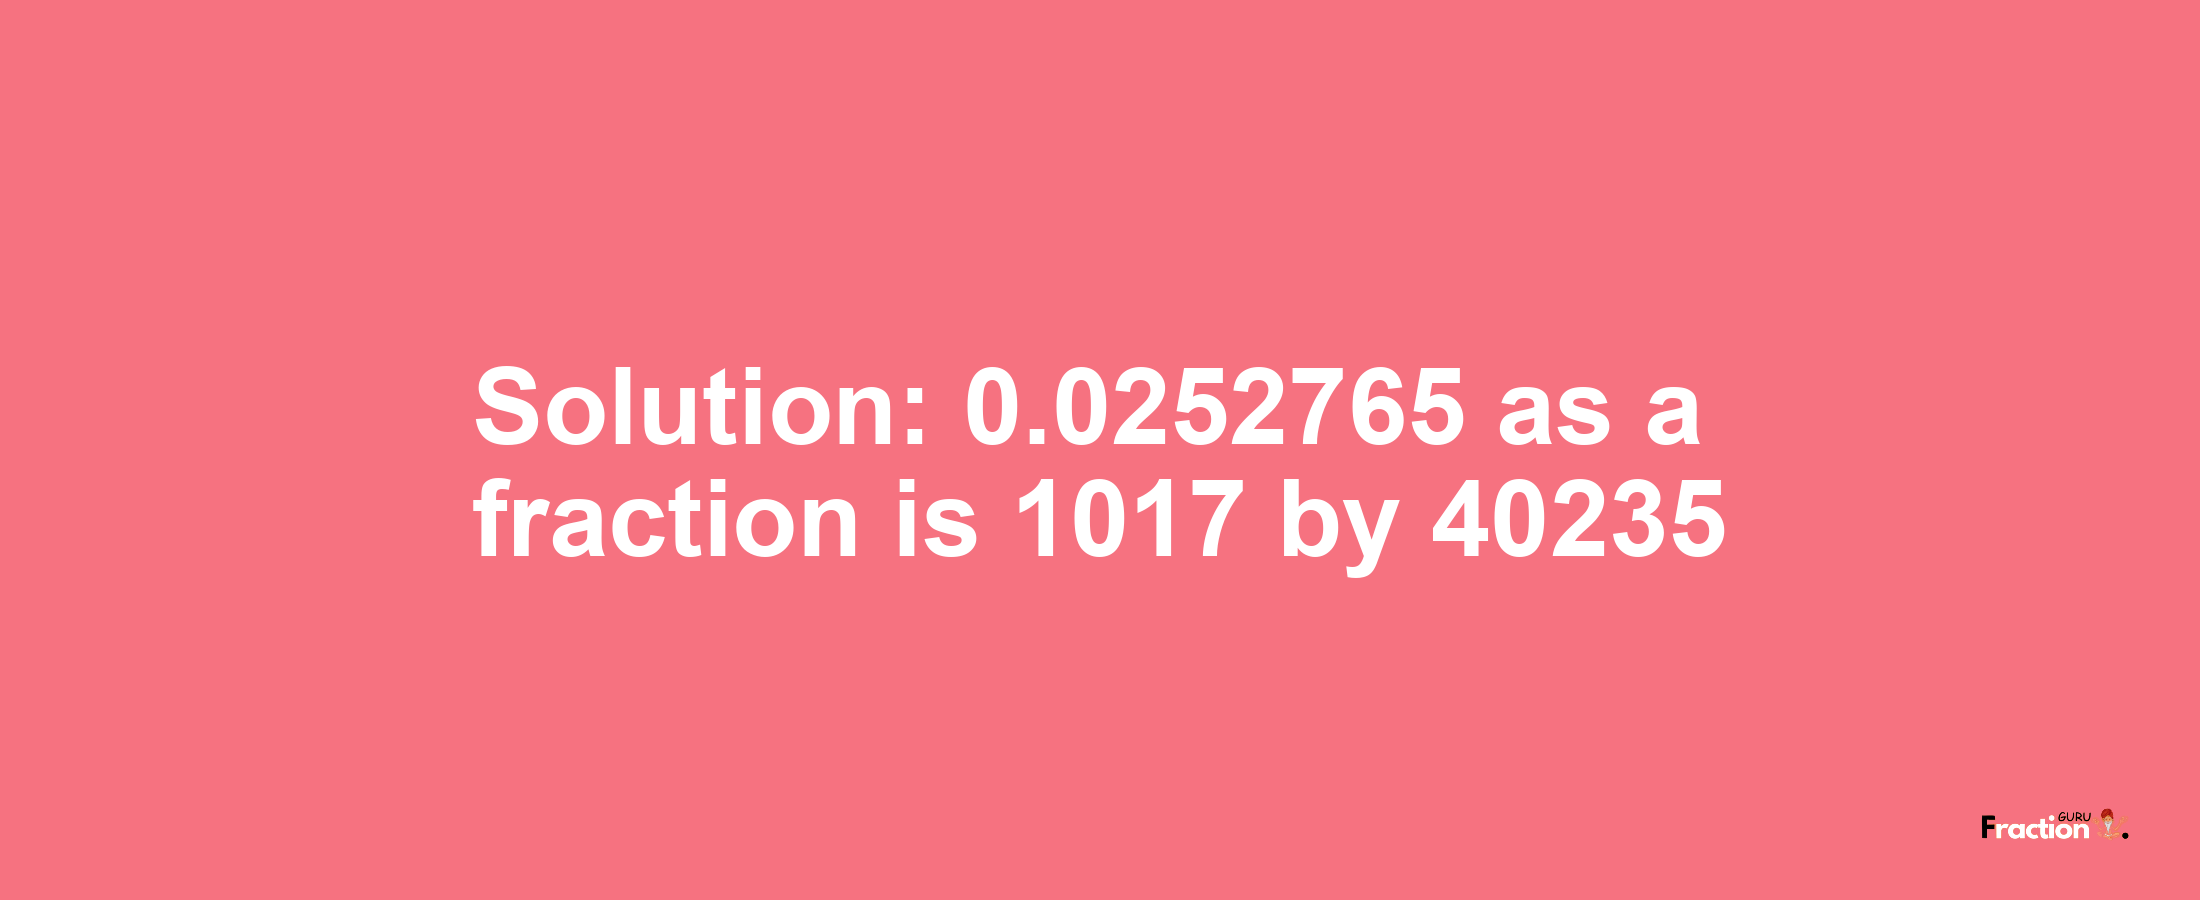 Solution:0.0252765 as a fraction is 1017/40235